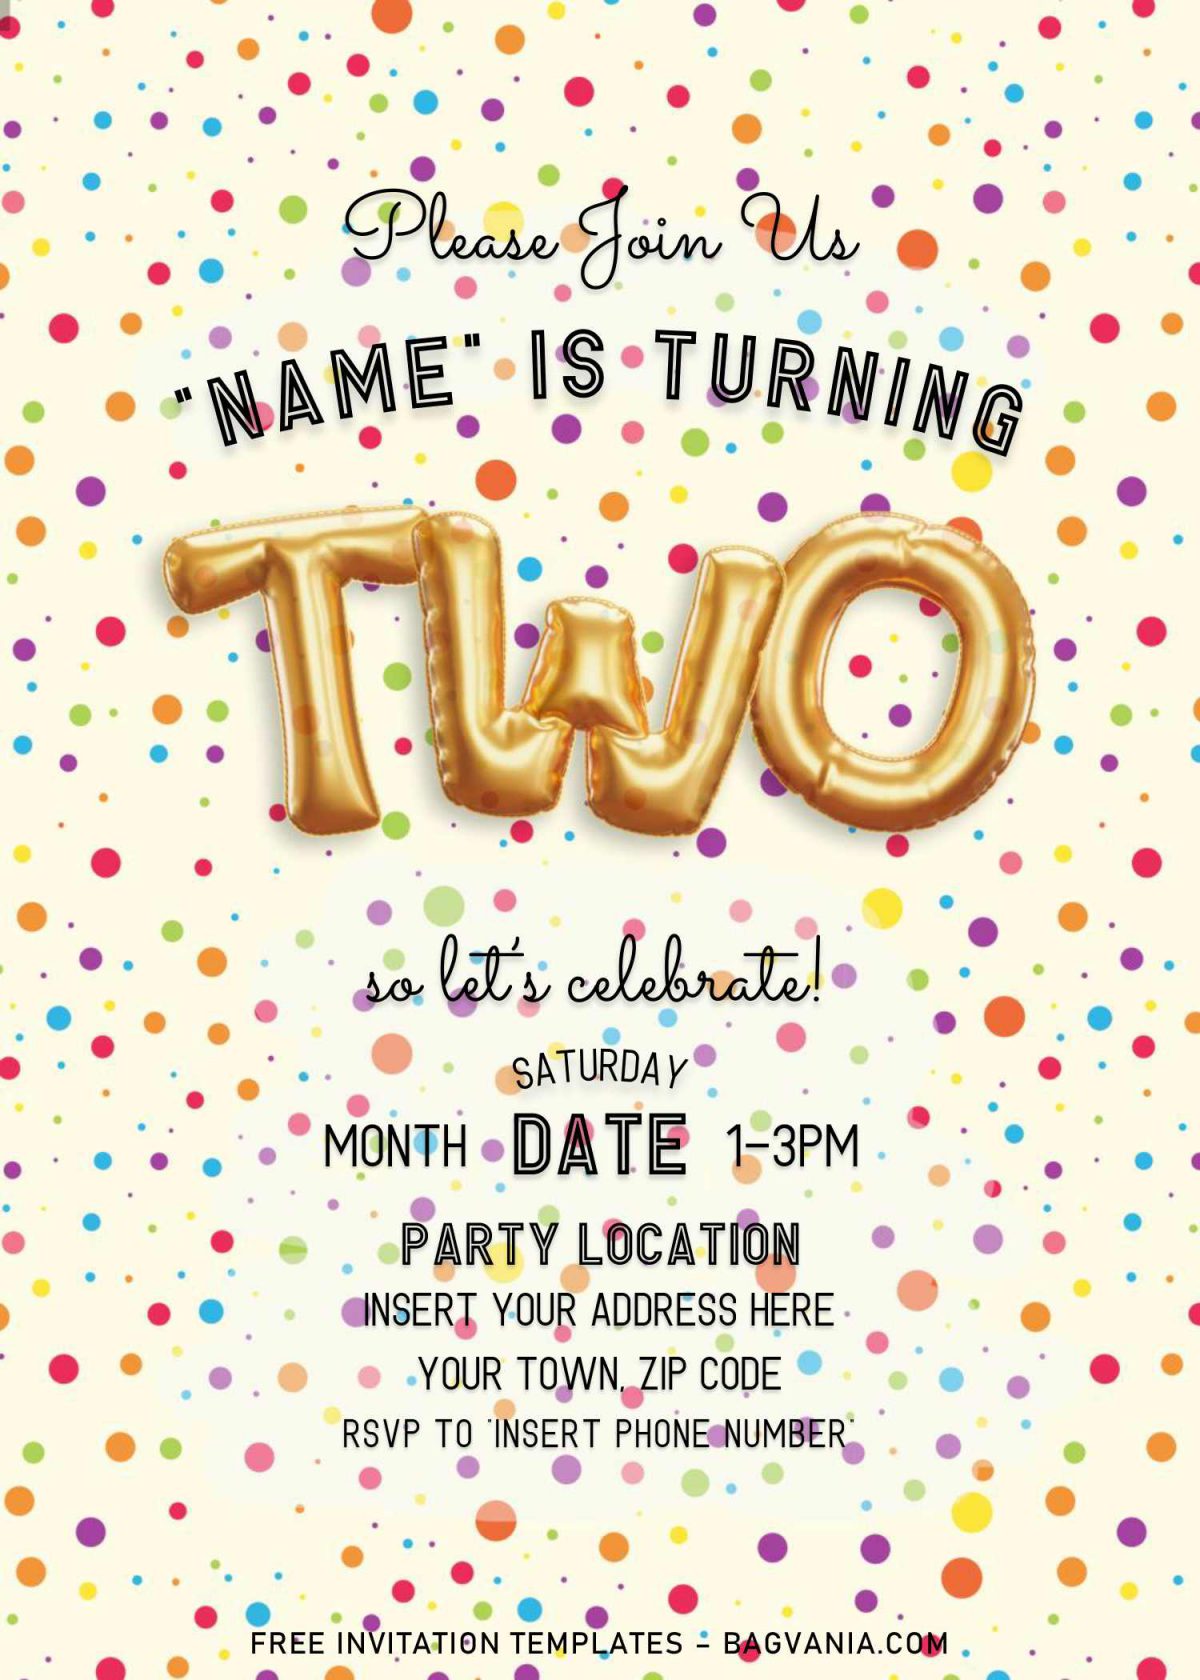 Free Balloons Themed Birthday Invitation Templates For Word and has colorful polka dot background